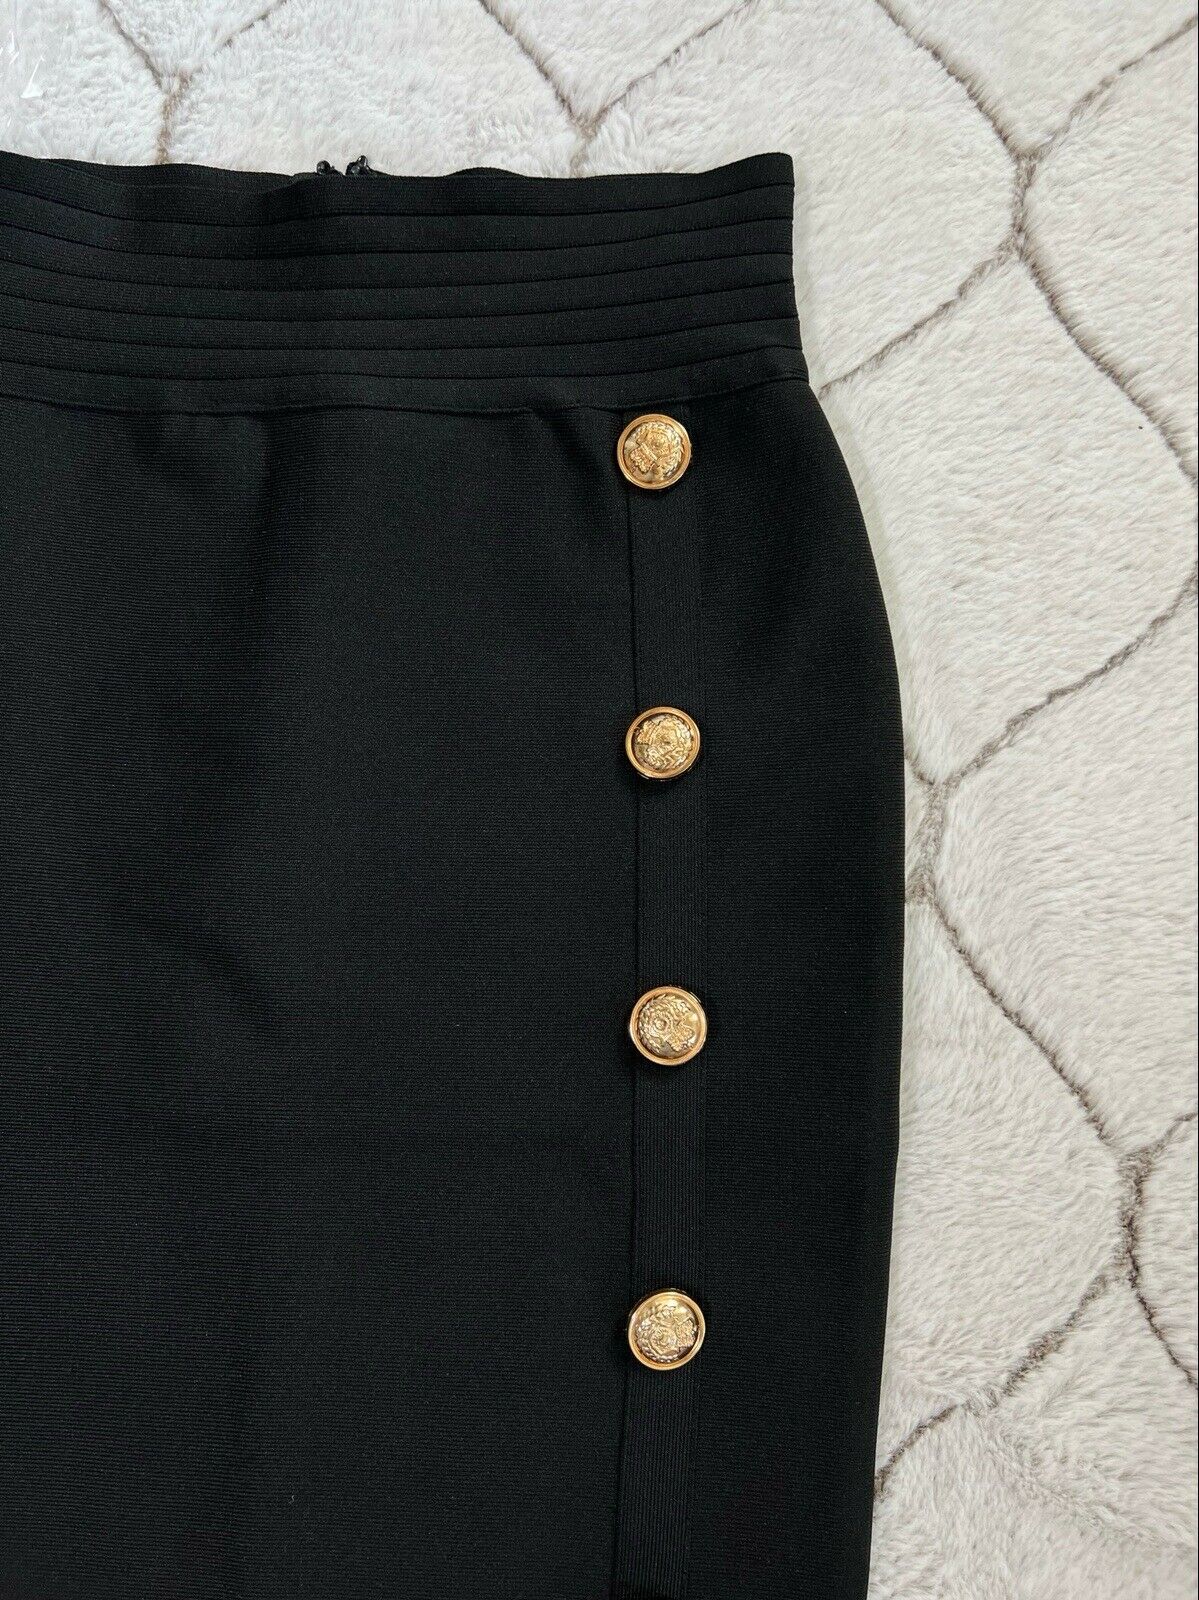 Buenos Aires Pencil Skirt